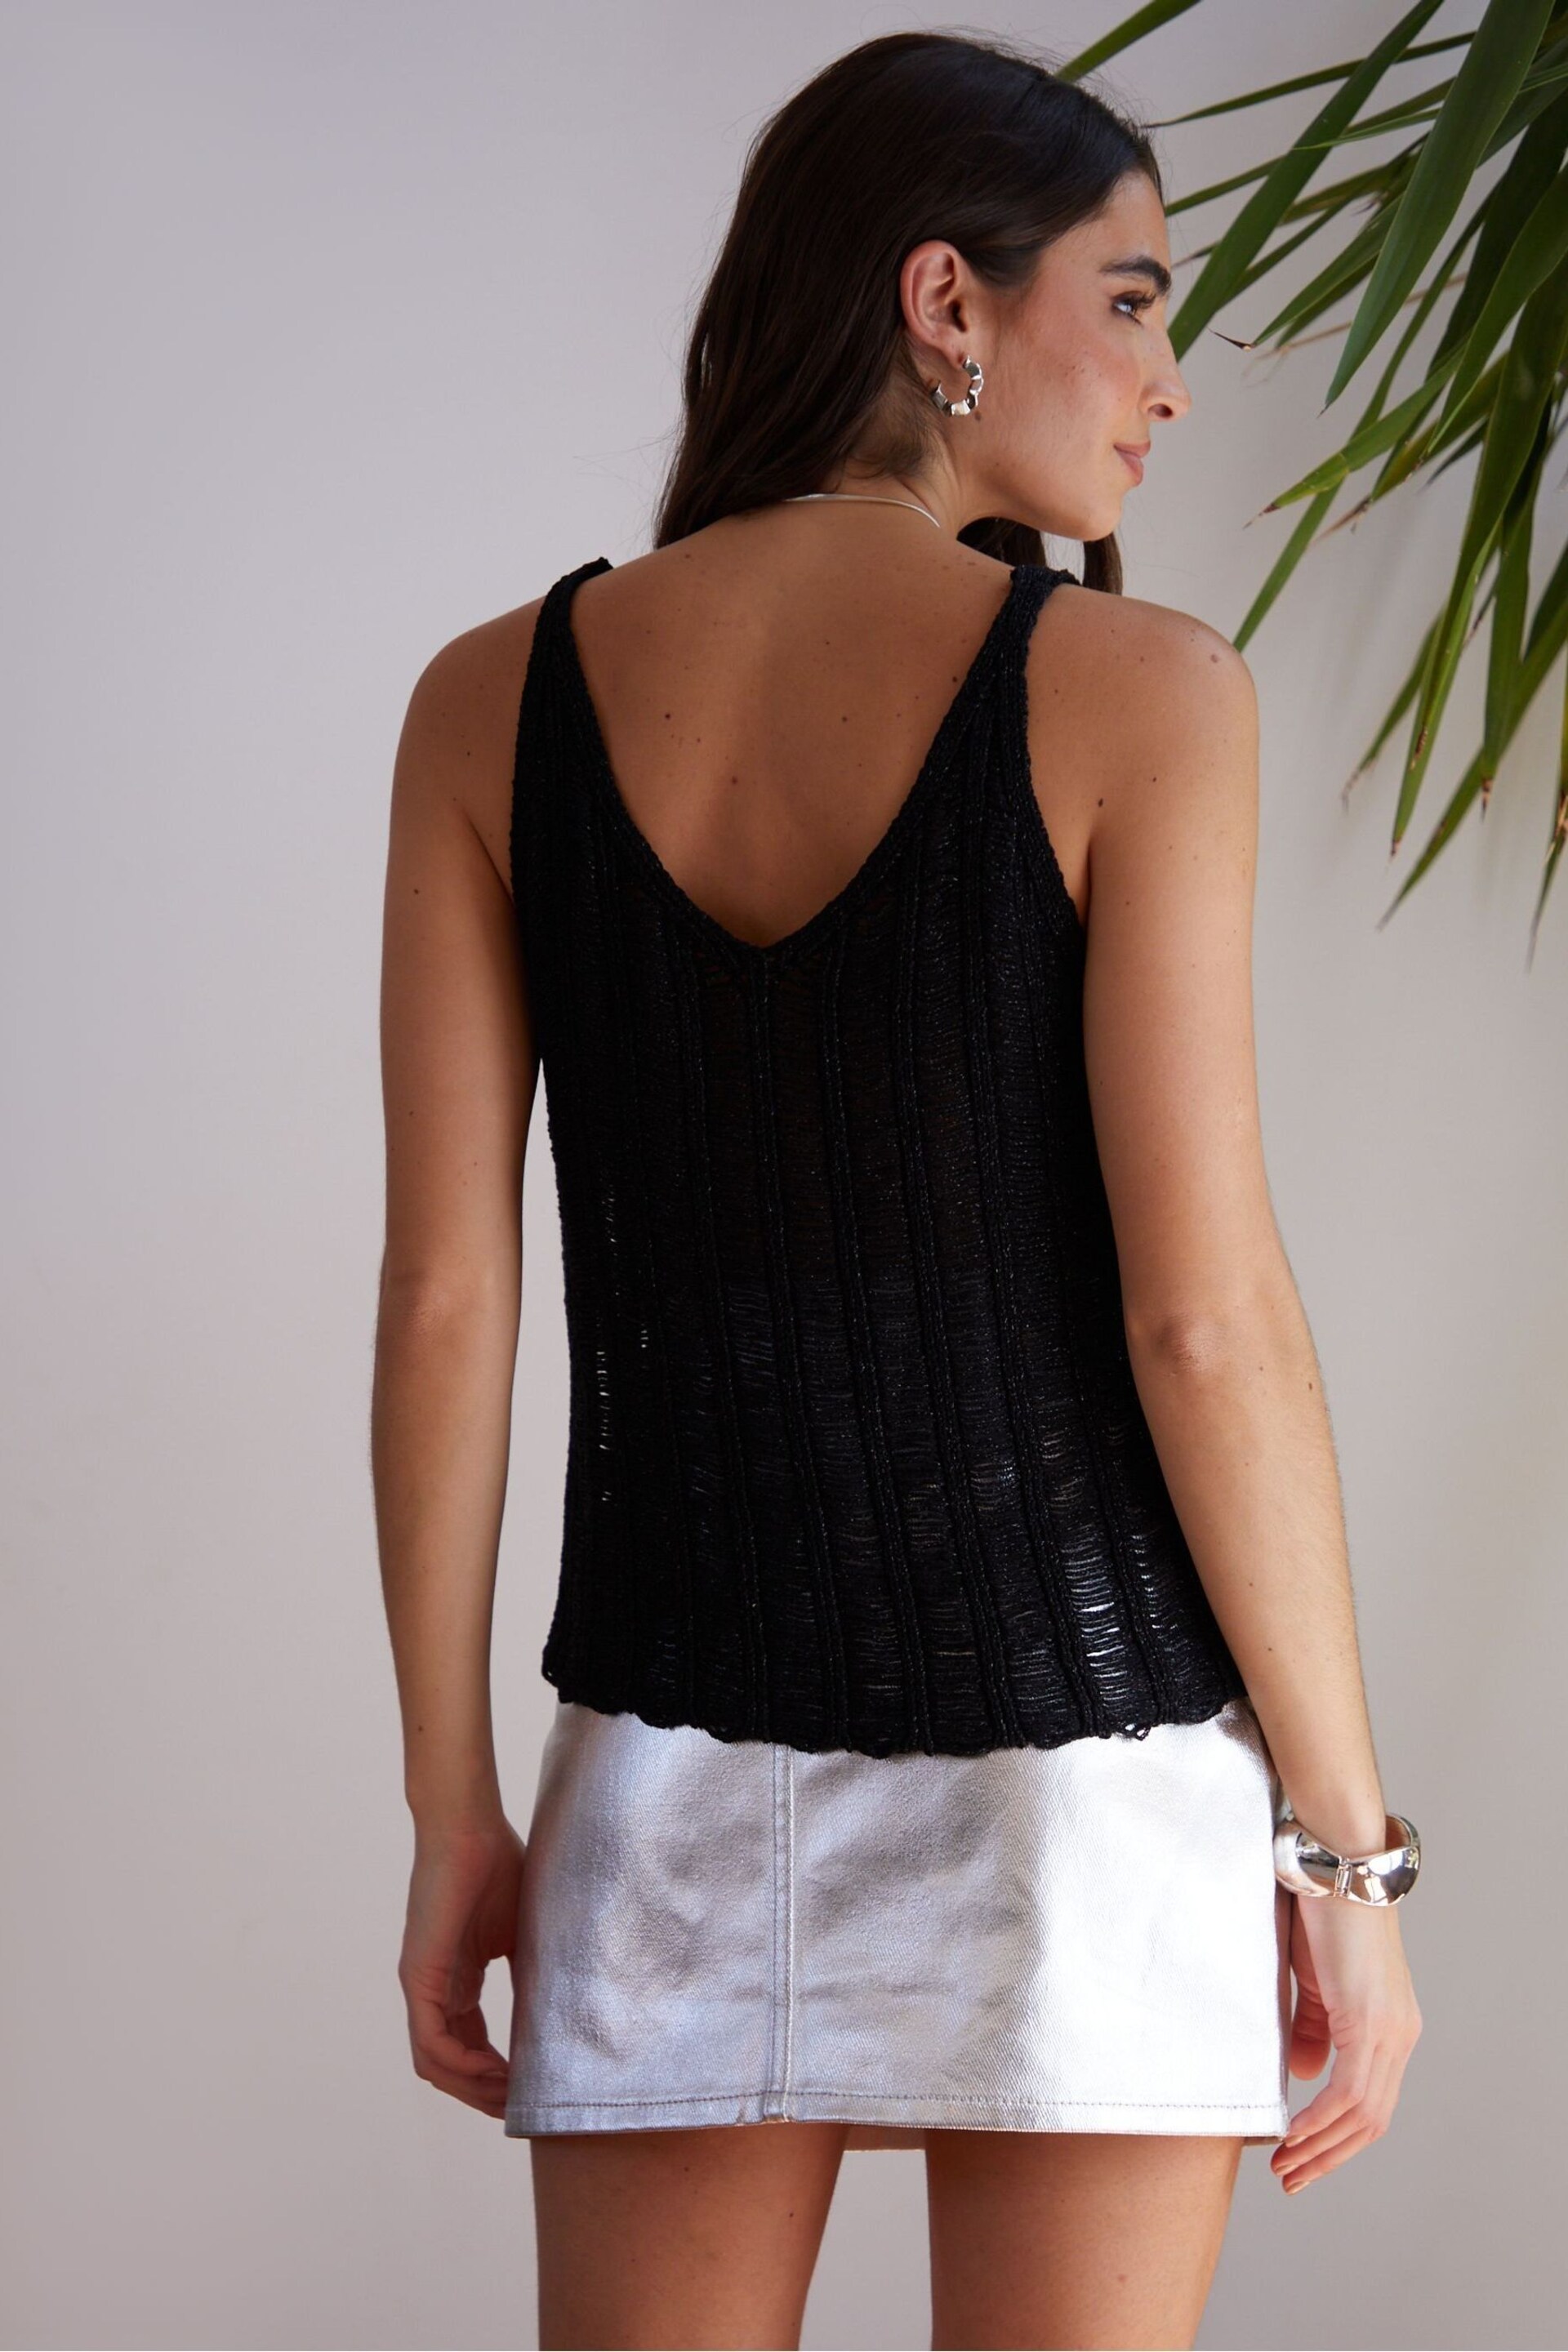 Threadbare Black Knitted Cami Vest Top - Image 3 of 4